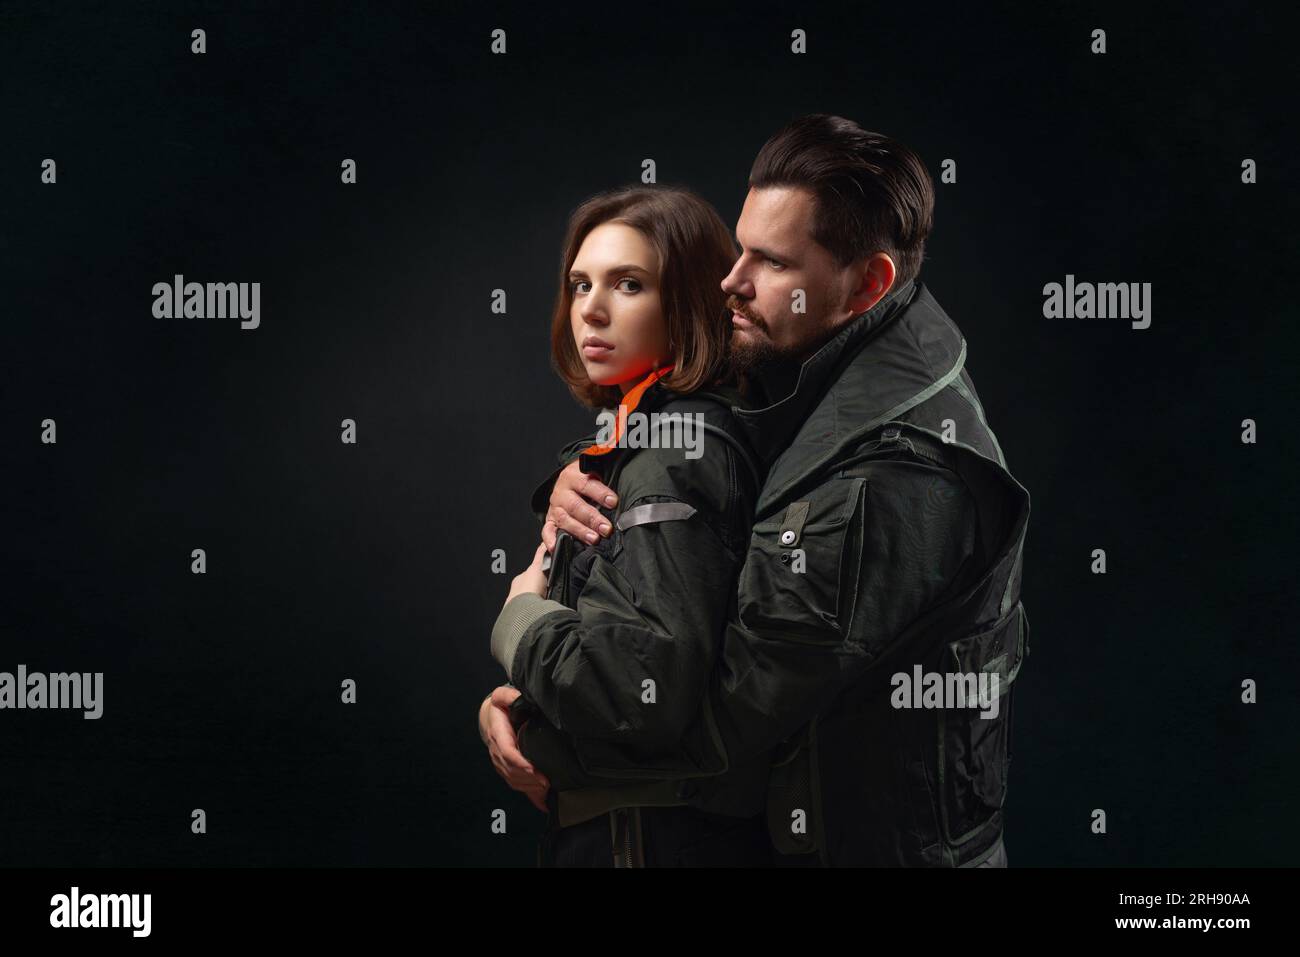 Hugging couple on a black background. Support concept. Stock Photo